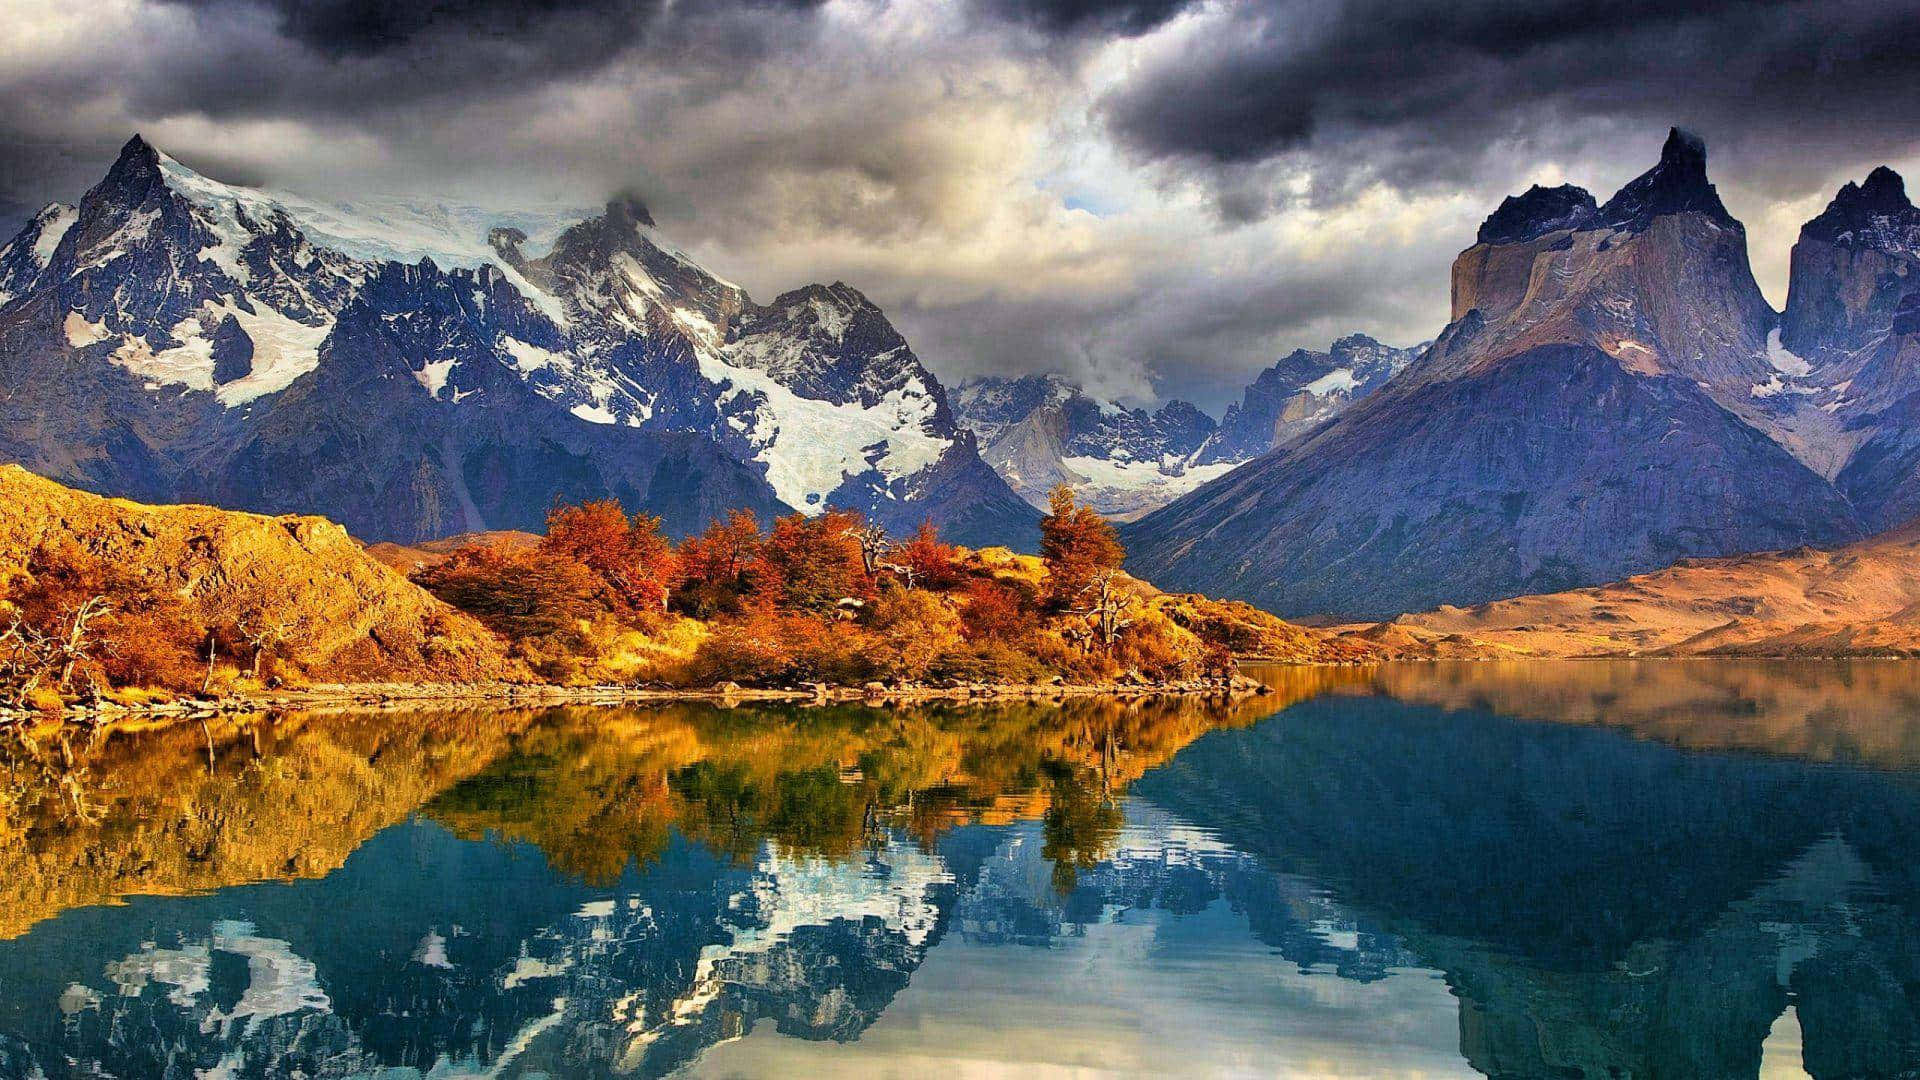 Explore the untouched nature of Patagonia